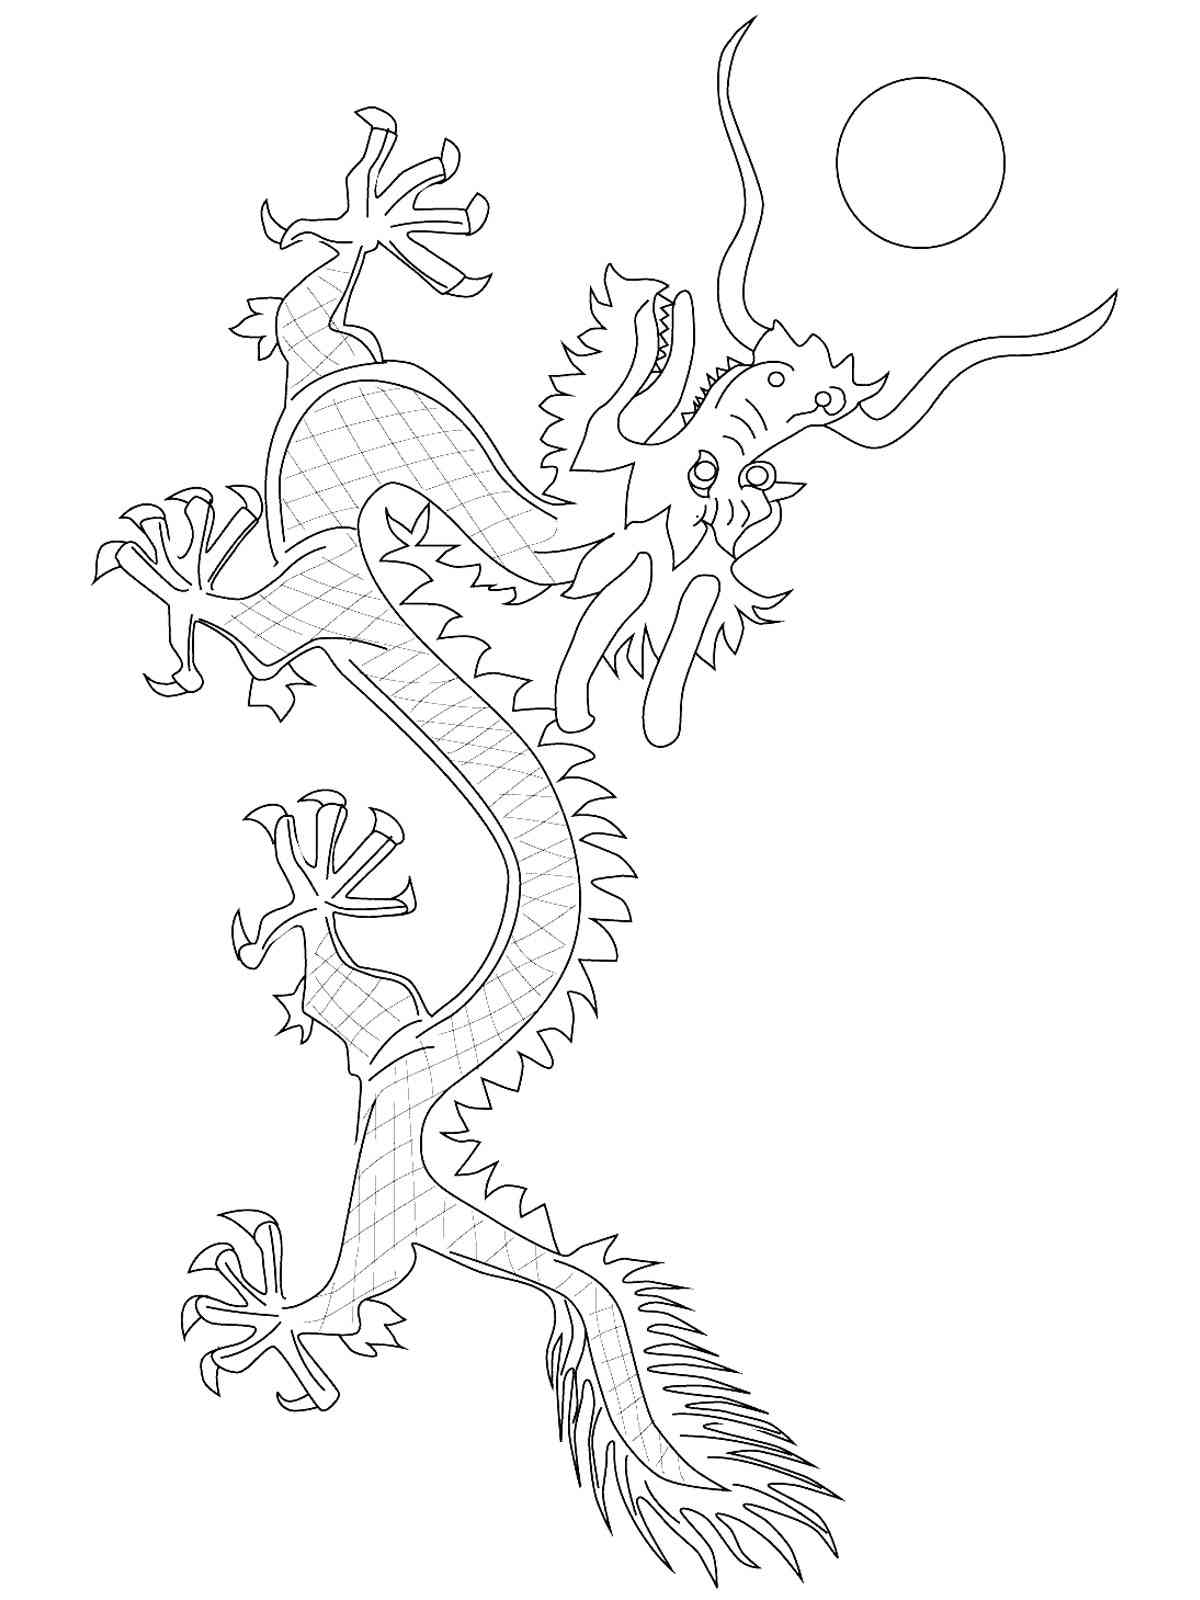 Chinese Dragon and Sun coloring page